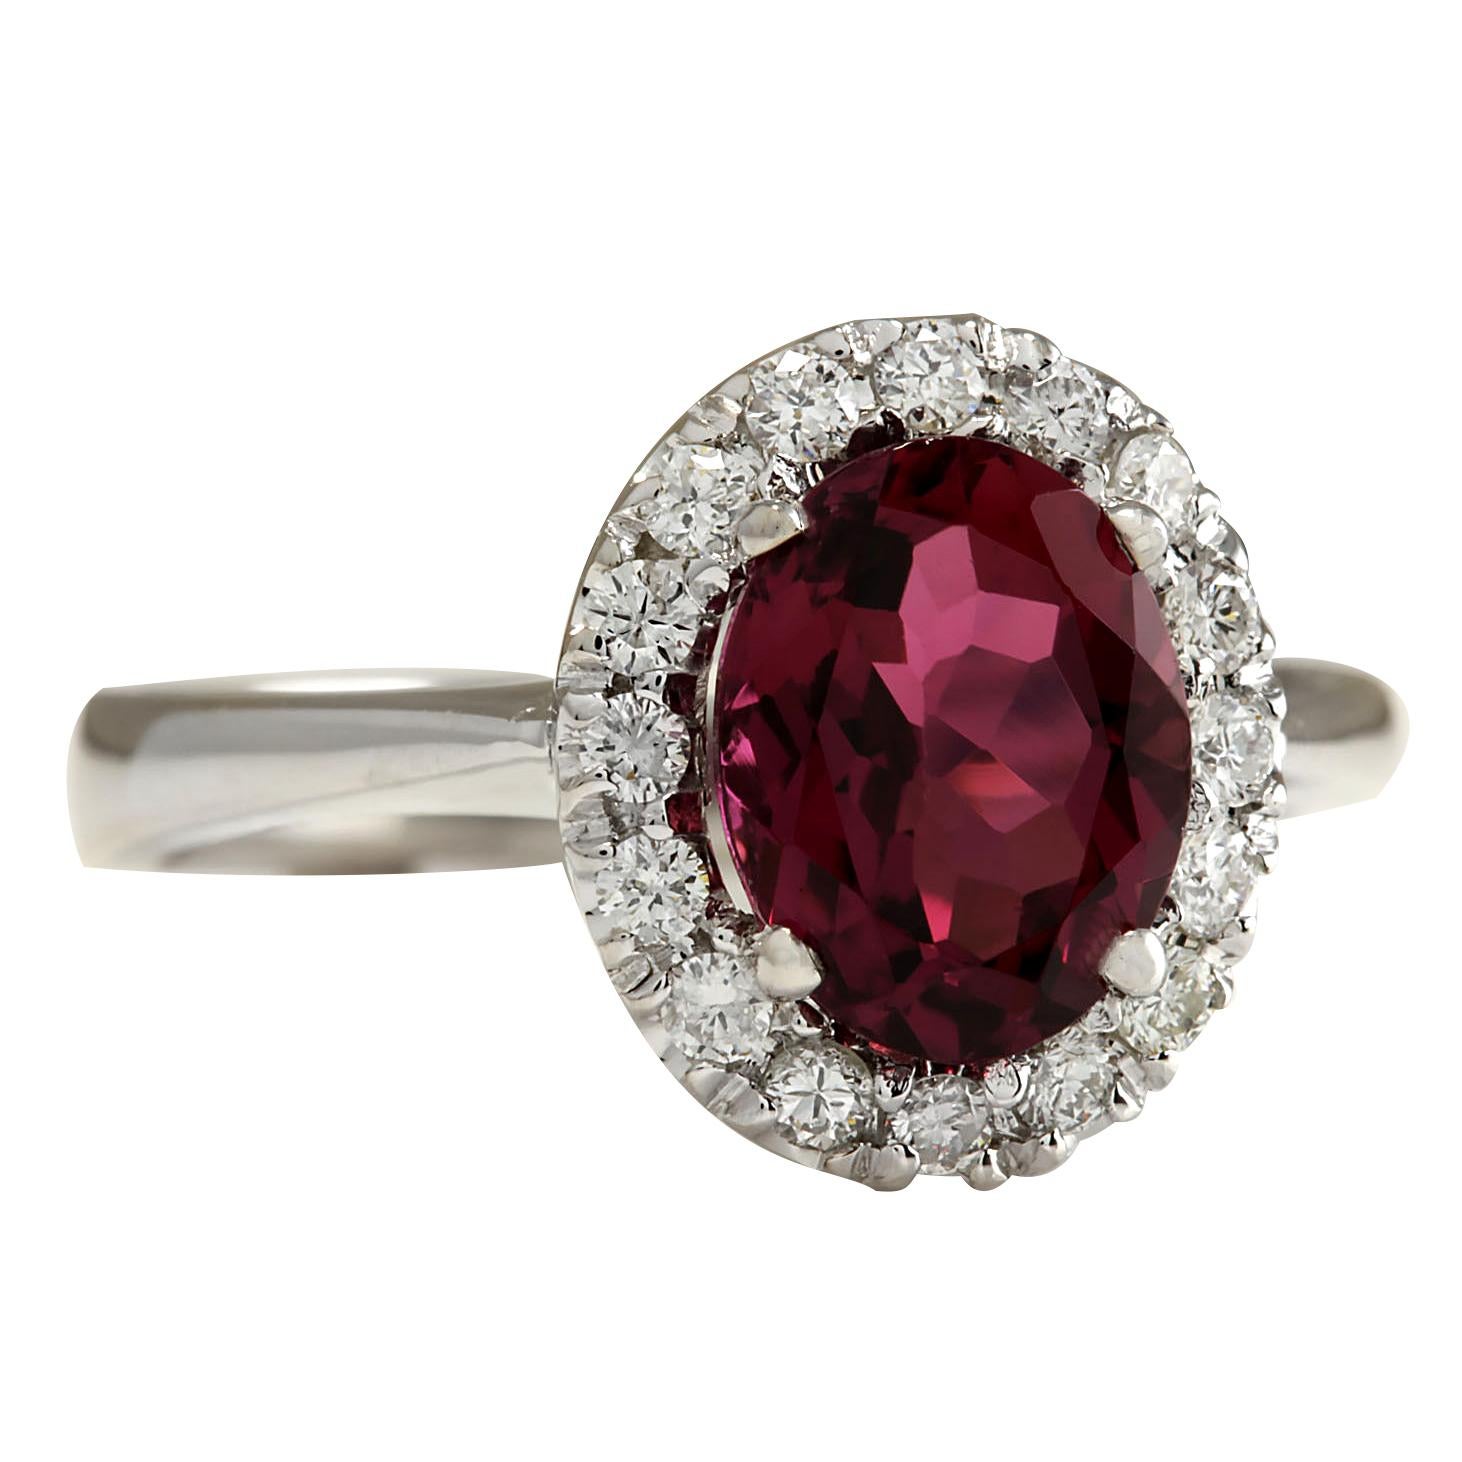 Stamped: 14K White Gold
Total Ring Weight: 4.0 Grams
Total Natural Tourmaline Weight is 2.00 Carat (Measures: 9.00x7.00 mm)
Color: Pink
Total Natural Diamond Weight is 0.35 Carat
Color: F-G, Clarity: VS2-SI1
Face Measures: 12.75x10.90 mm
Sku: